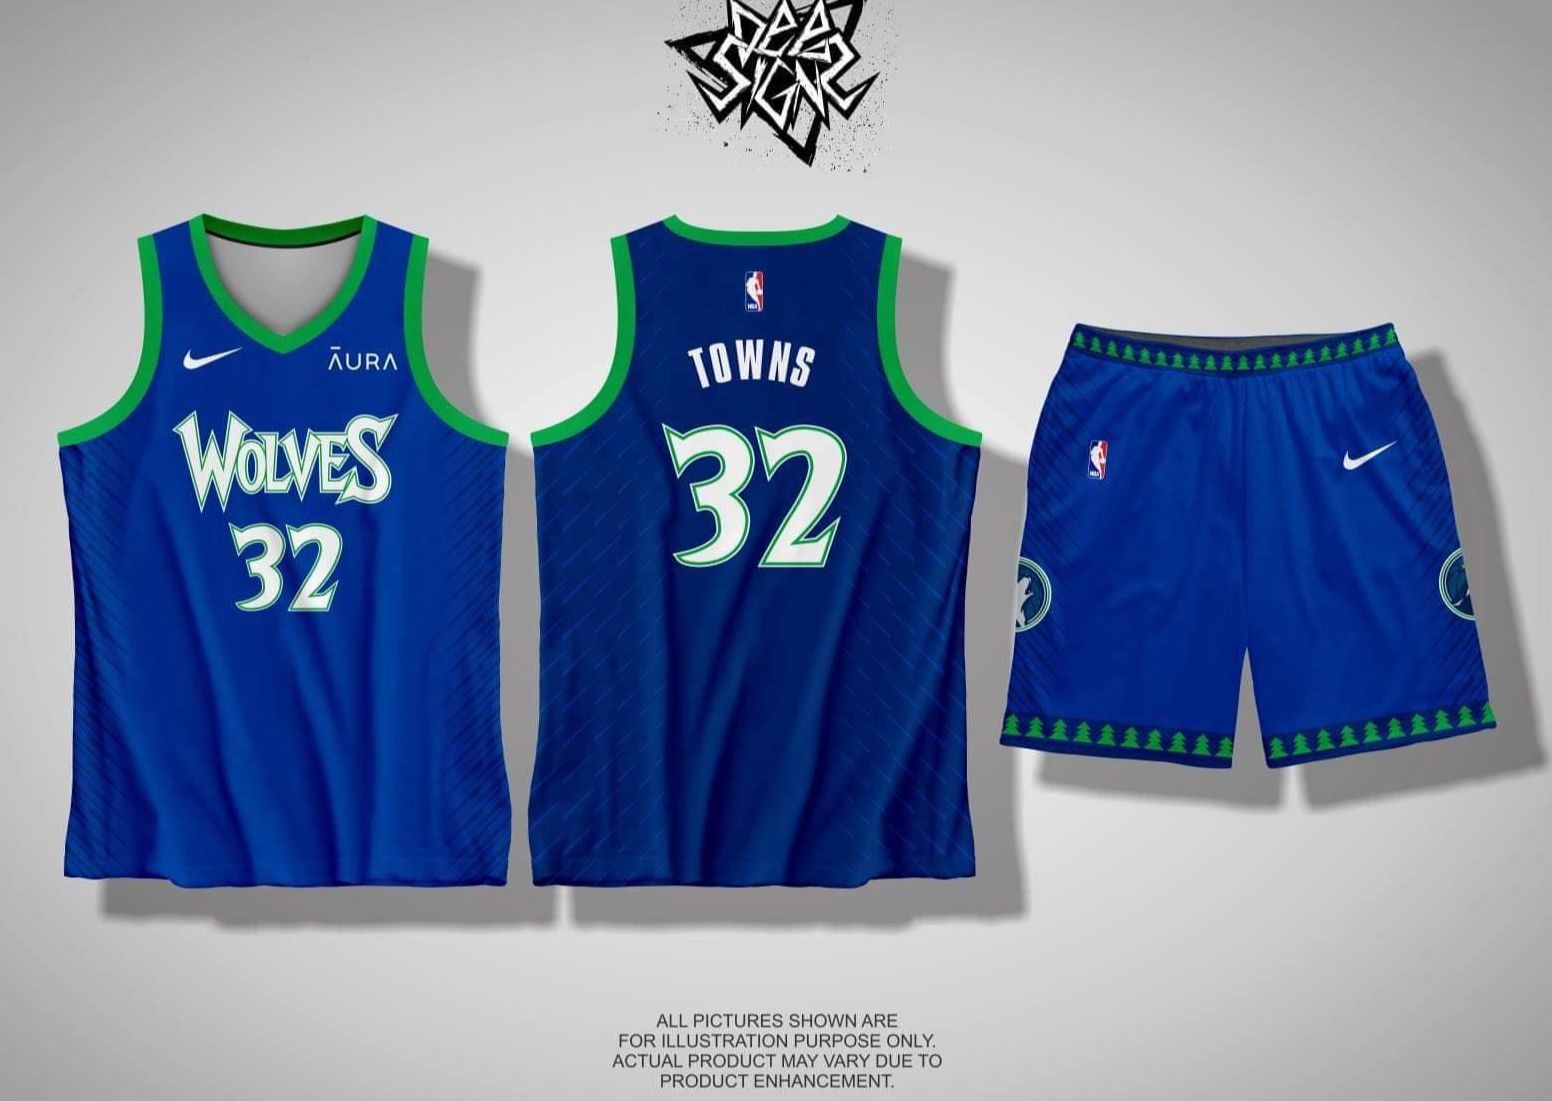 Minnesota Timberwolves on X: pull your Wolves jerseys out. 𝐈𝐓